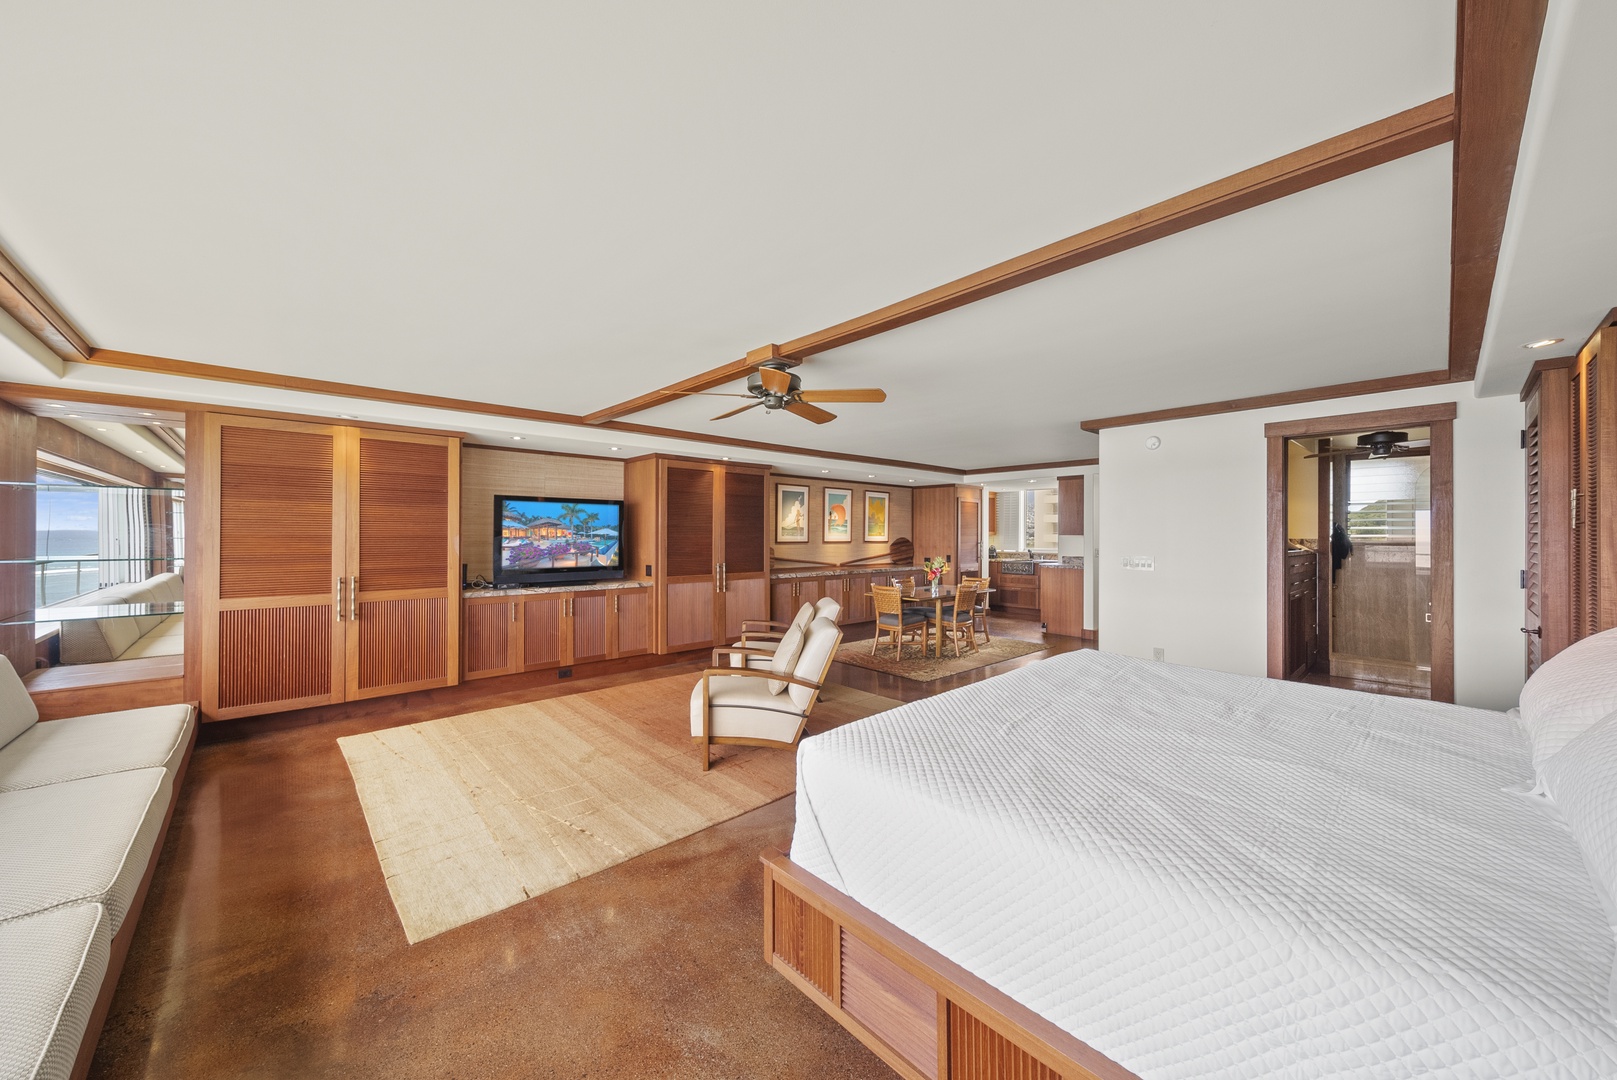 Honolulu Vacation Rentals, Diamond Head Sunset - This space is also equipped with a ceiling fan for optimal temperature control and comfort